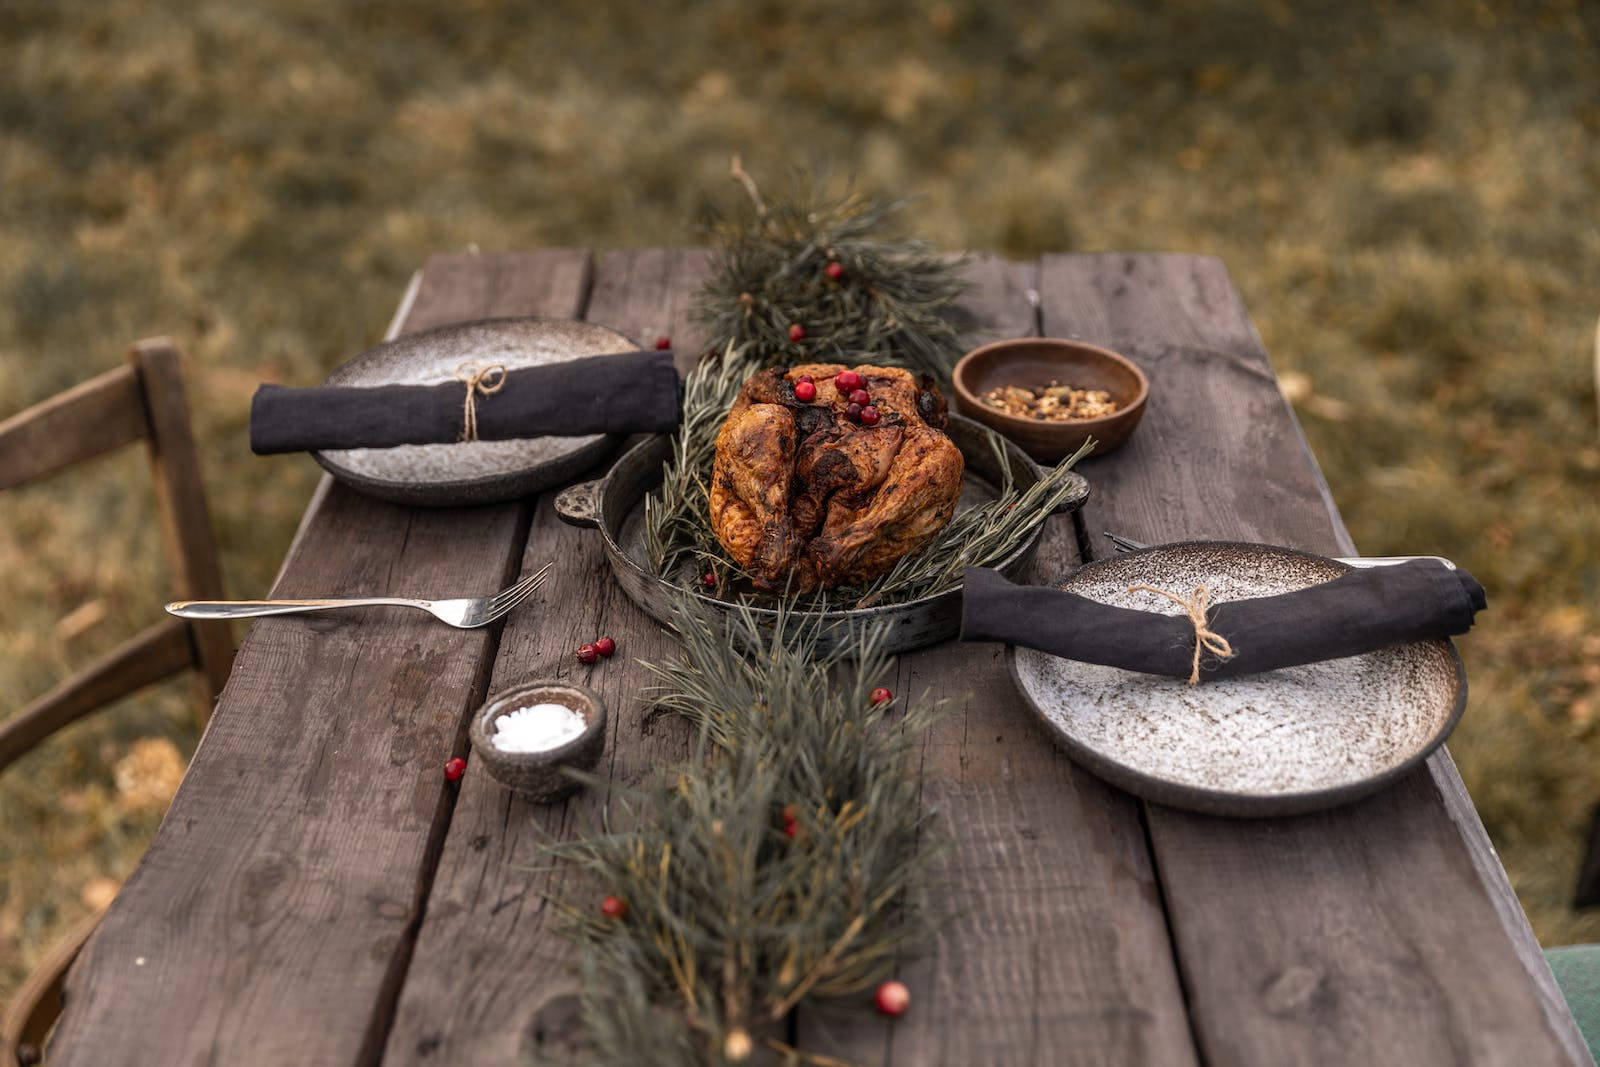 Rustic Thanksgiving Day Table Set Up Wallpaper